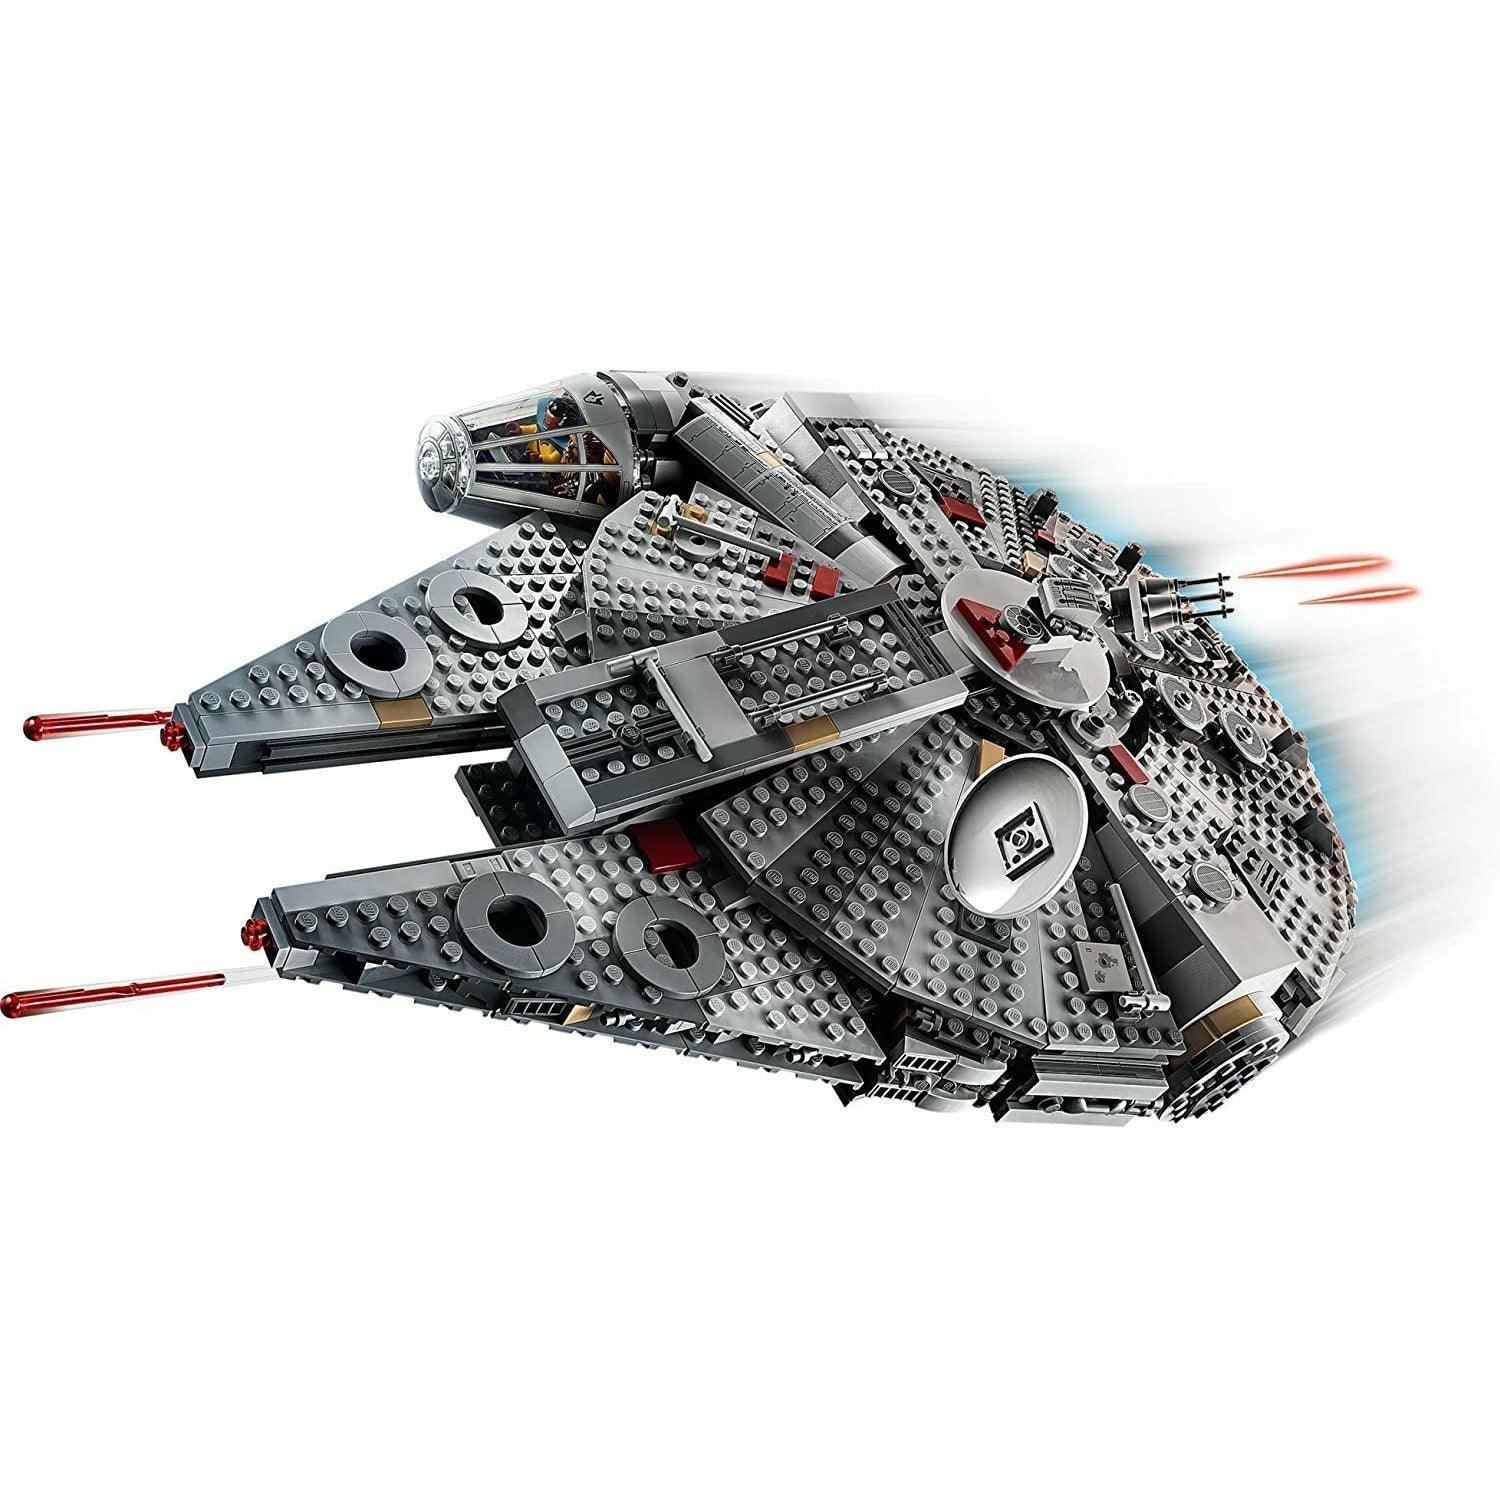 LEGO Star Wars: The Rise of Skywalker Millennium Falcon 75257 Starship Model Building Kit and Minifigures (1,351 Pieces) - BumbleToys - 14 Years & Up, 5-7 Years, 8+ Years, 8-13 Years, Boys, LEGO, OXE, Pre-Order, star wars